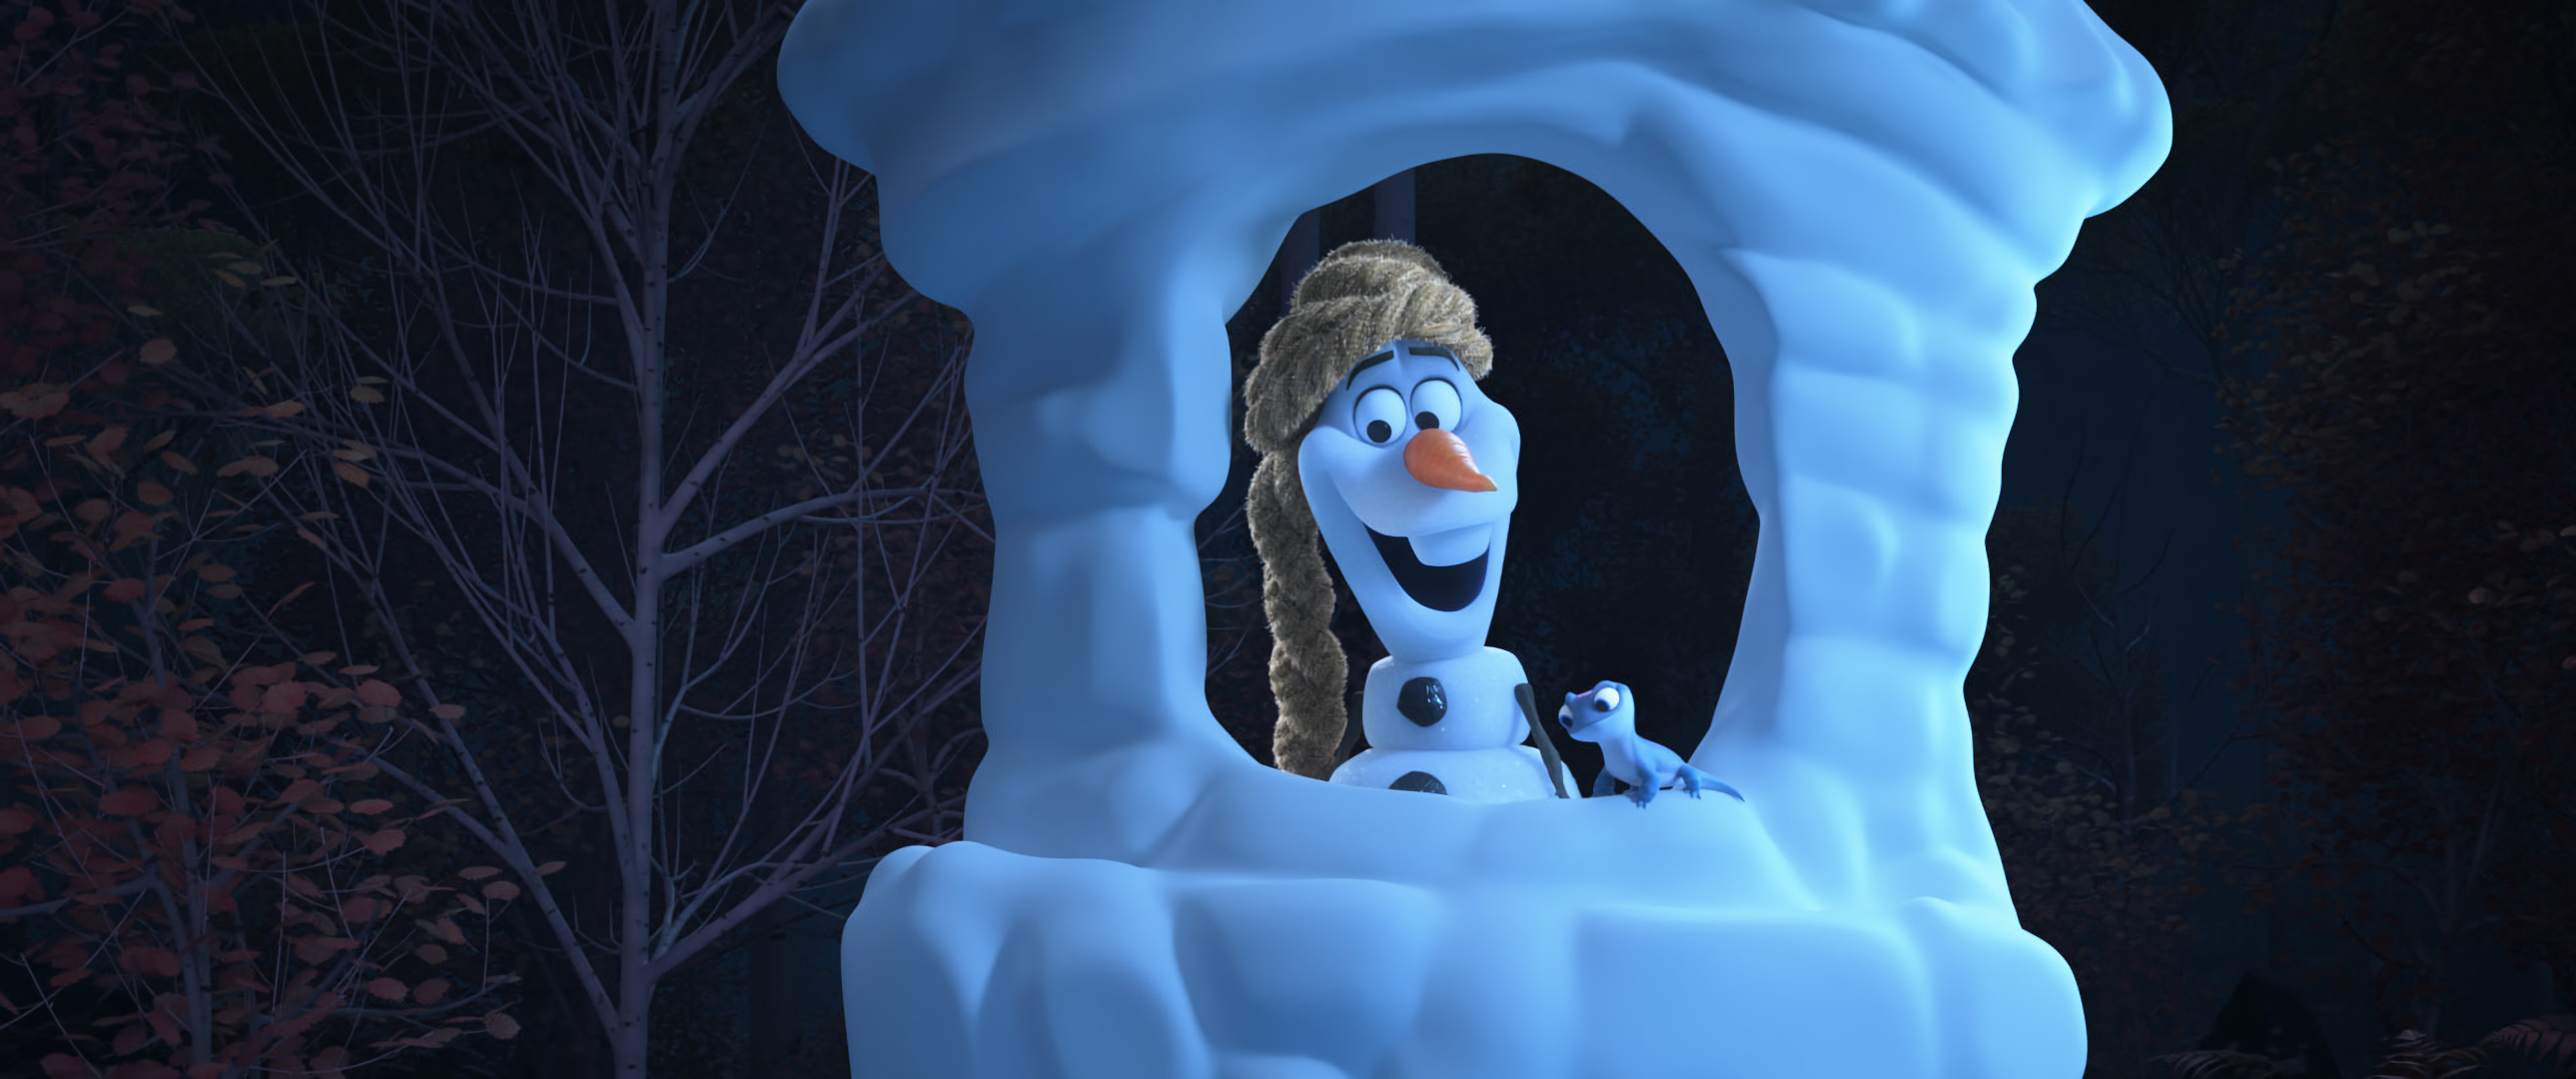 TV Show Olaf Presents HD Wallpaper | Background Image